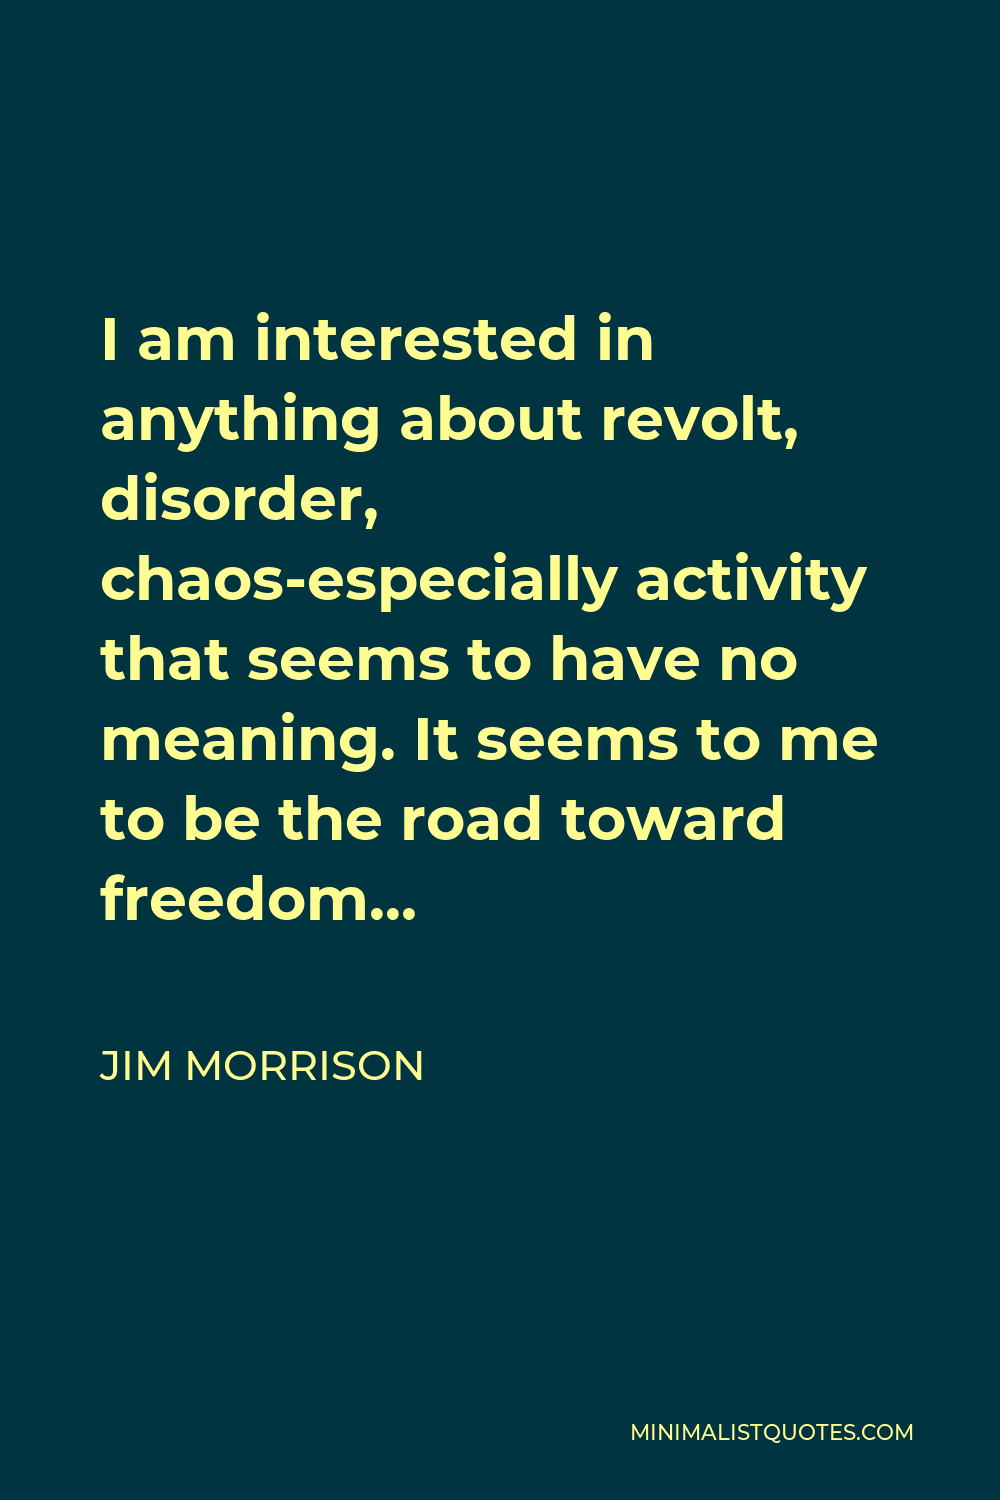 Jim Morrison Quote - I am interested in anything about revolt, disorder, chaos, especially activity that seems to have no meaning.